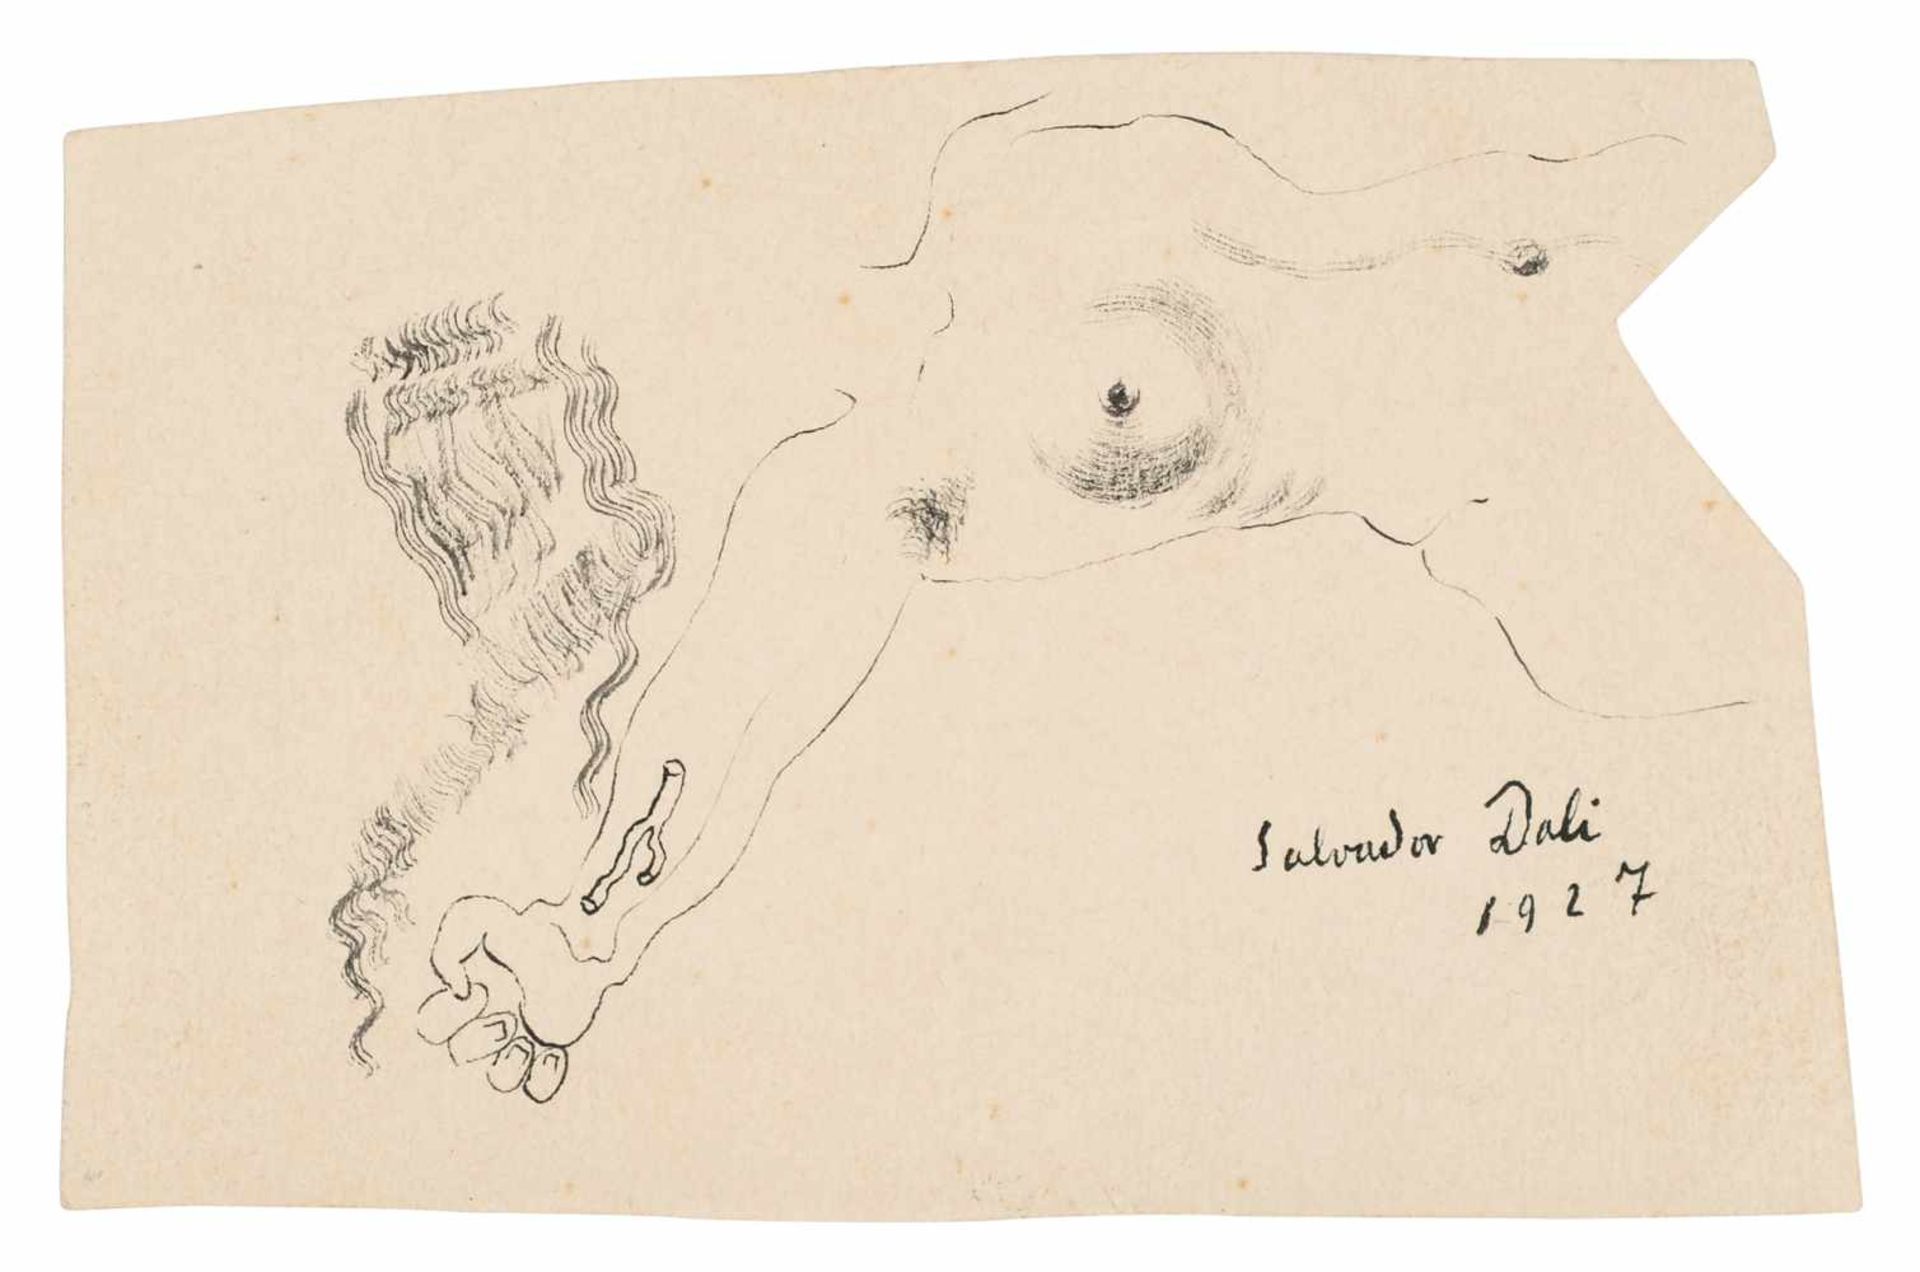 Salvador Dalí (Figueres, 1904 - 1989) Ink drawing on paper. Signed and dated in 1927. This is a